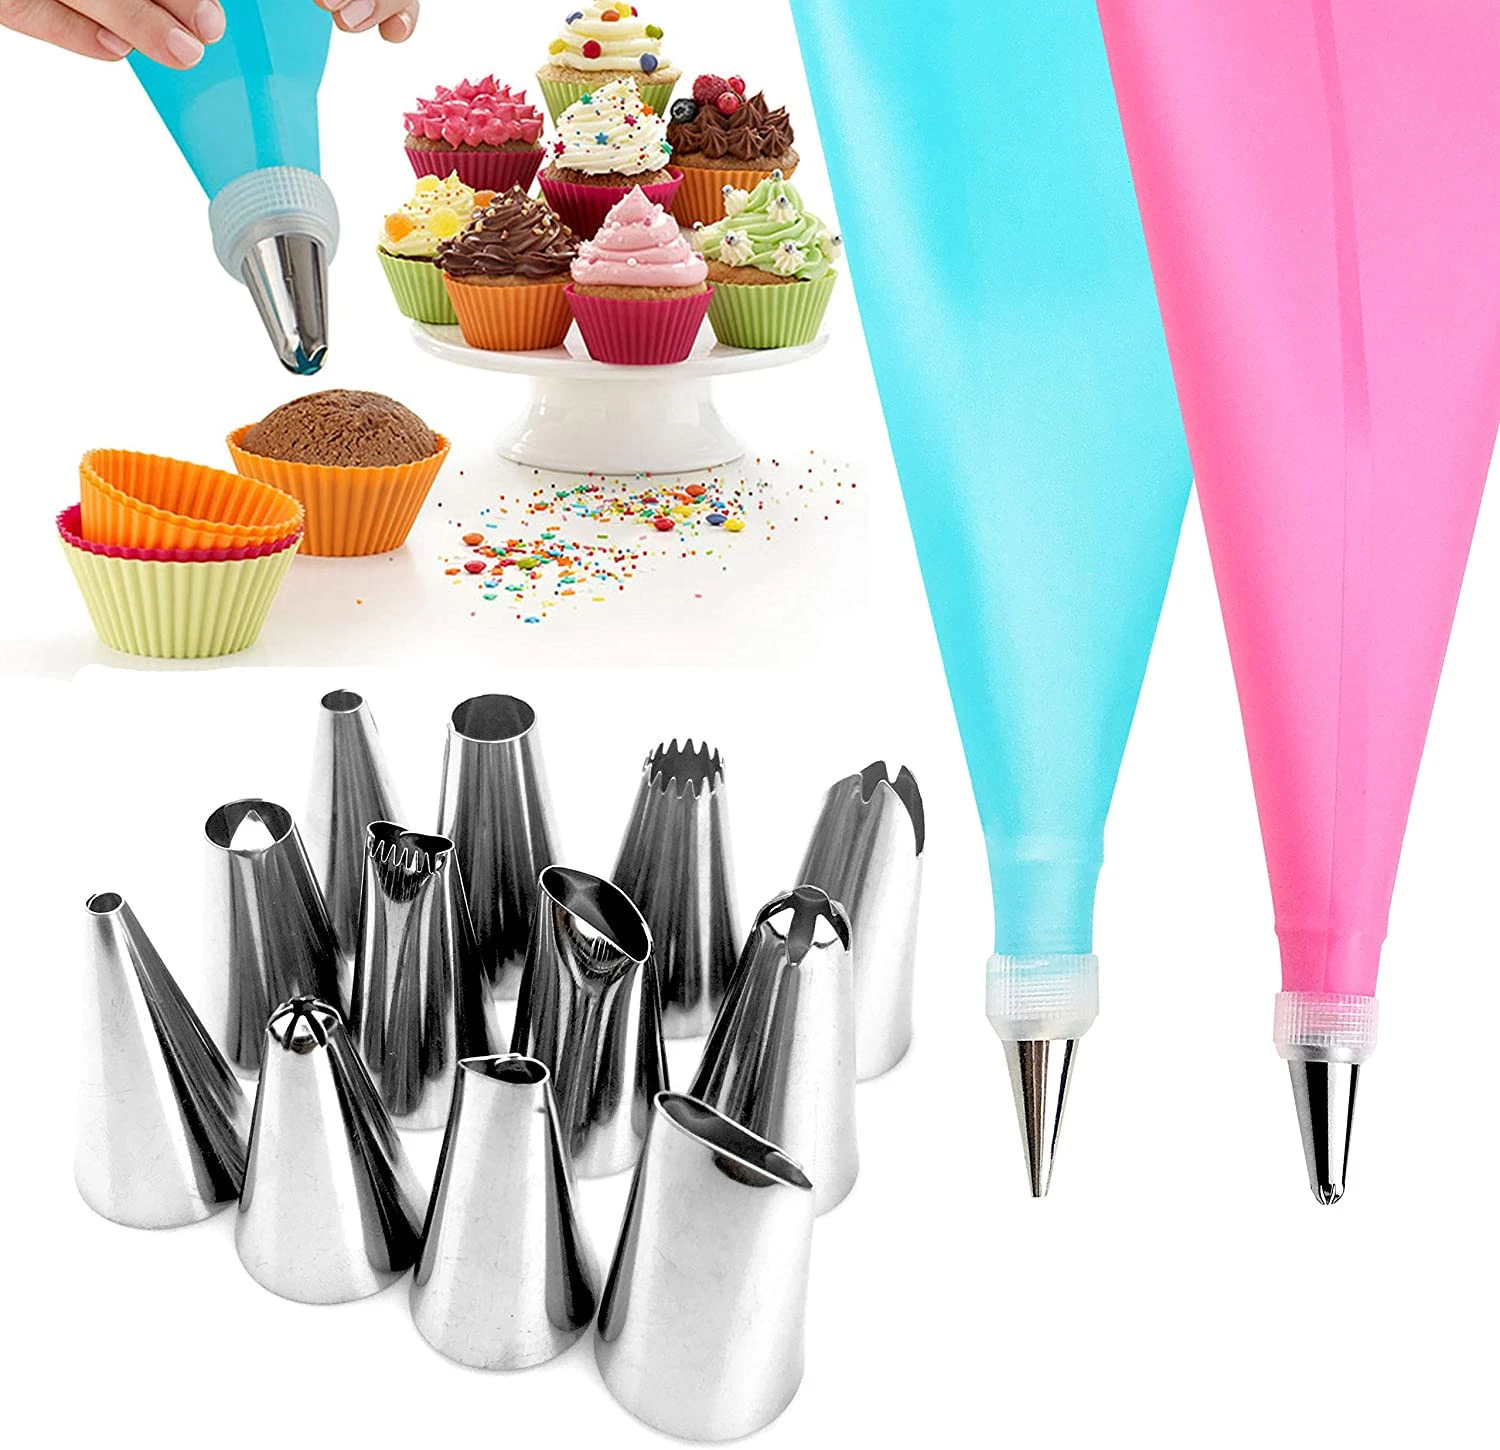 26 Pieces Cake Decorating Kits Supplies with 24 Numbered Icing Tips, Silicone Pastry Bags Baking Frosting Tools Set